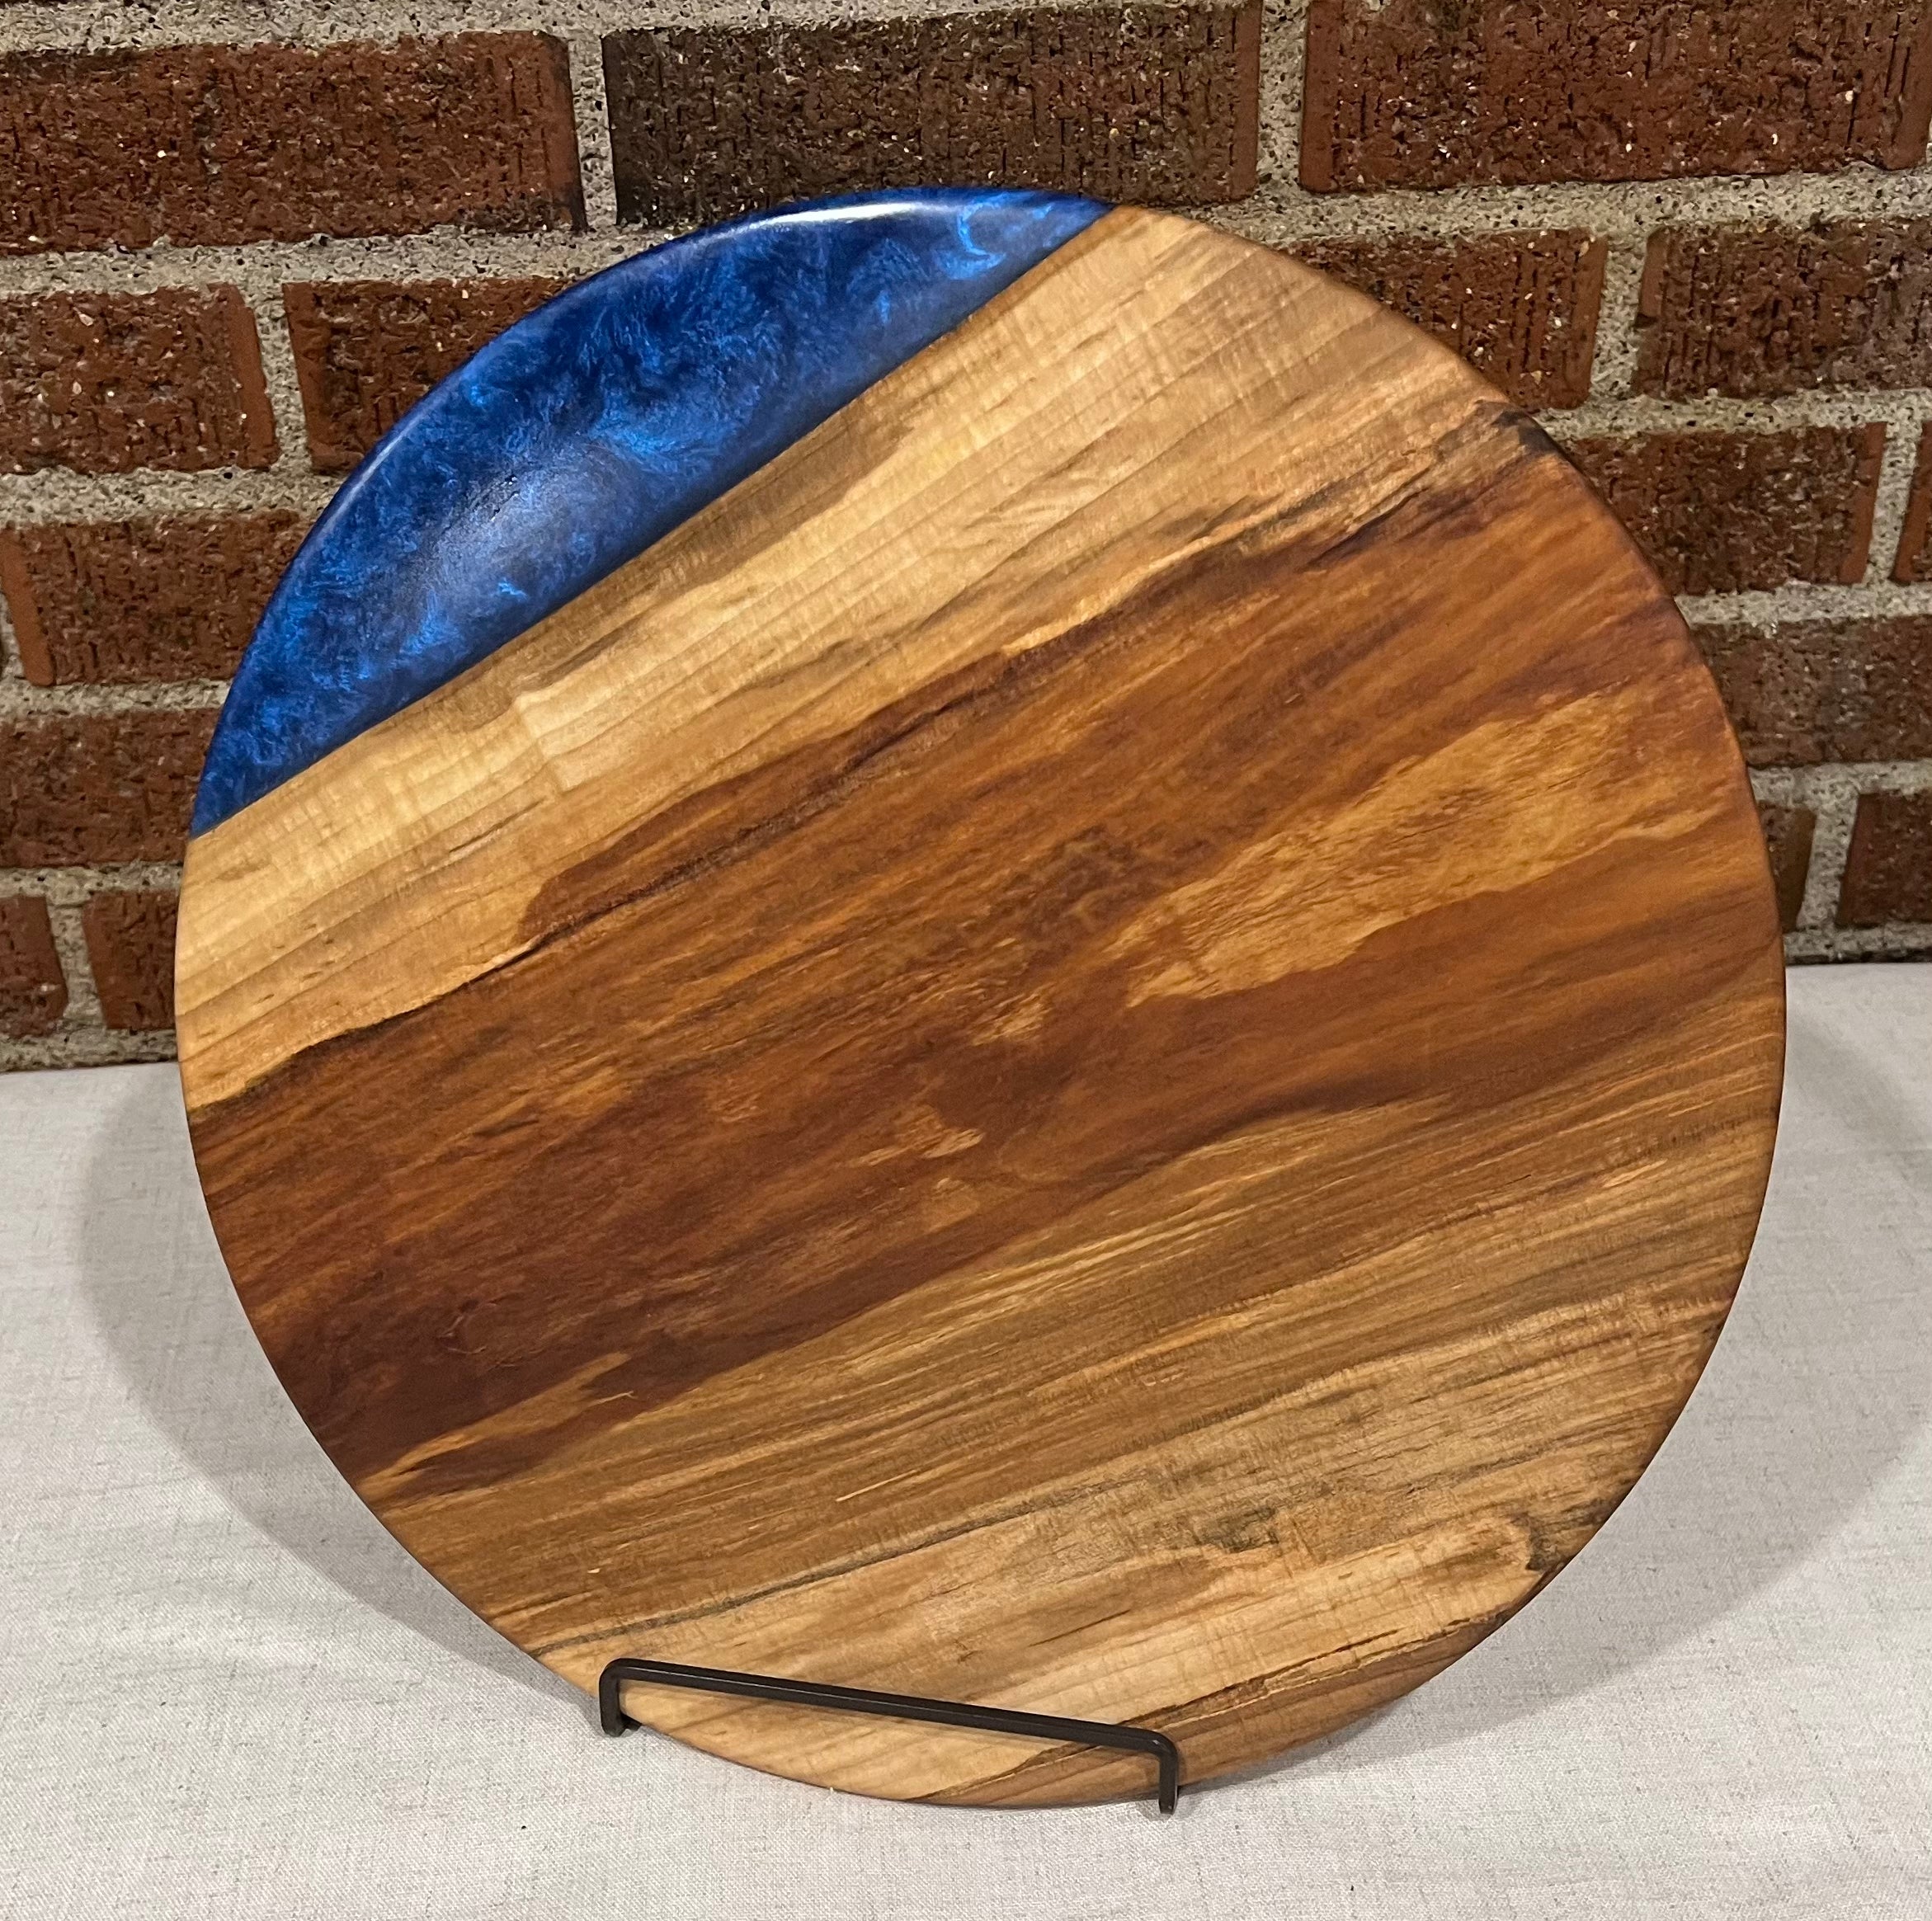 Limited- Resin coated wood slices – SuzanQwqArt